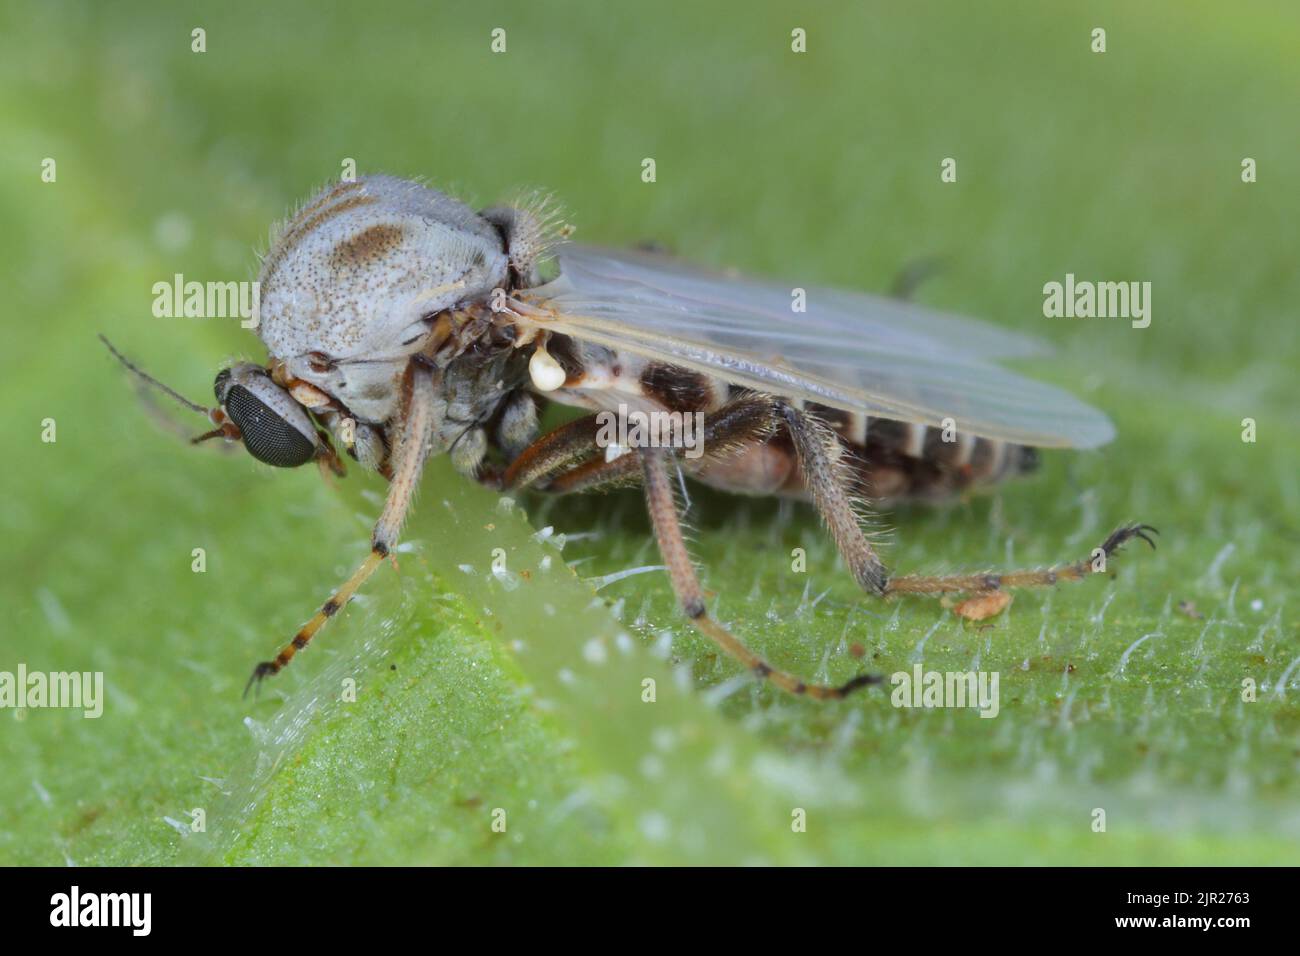 Female of flie from family Chironomidae (informally known as chironomids, nonbiting midges, or lake flies). Stock Photo